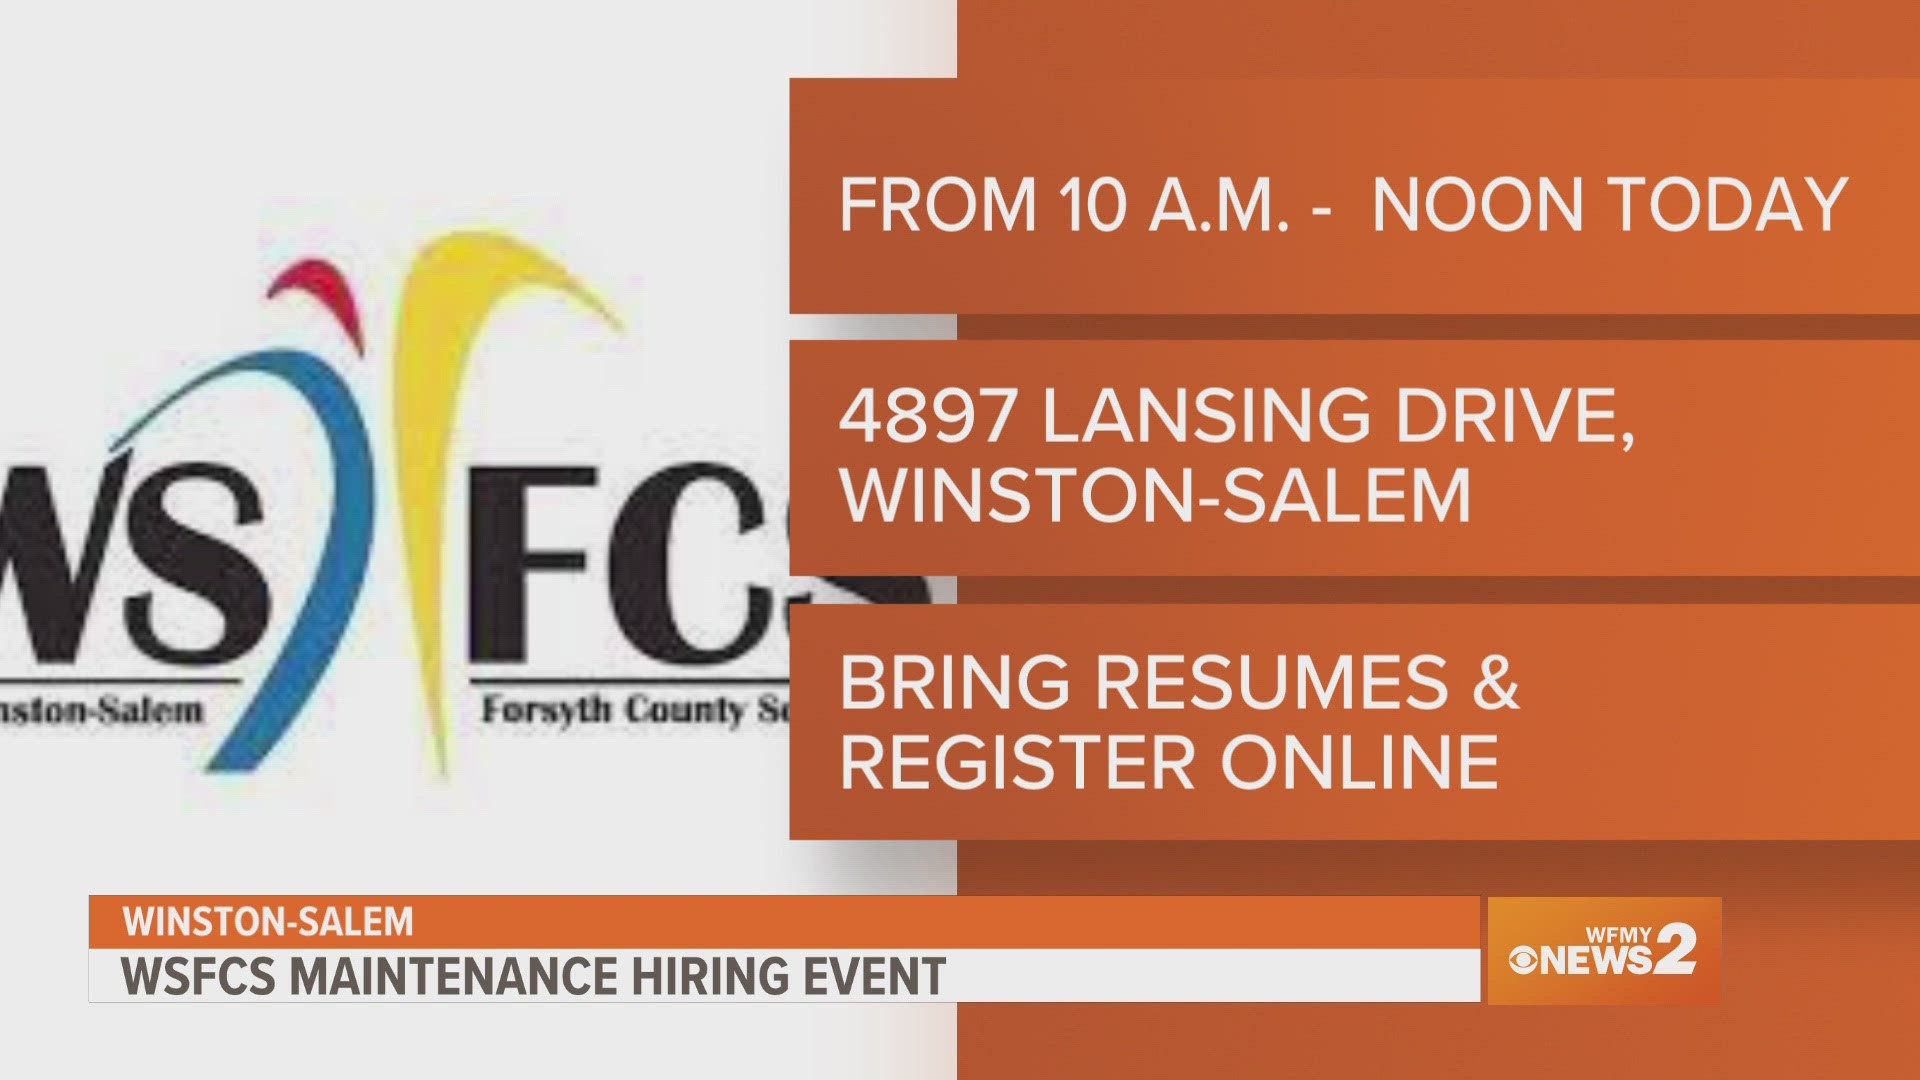 The event will be held at the maintenance training center on Lansing Drive in Winston-Salem.